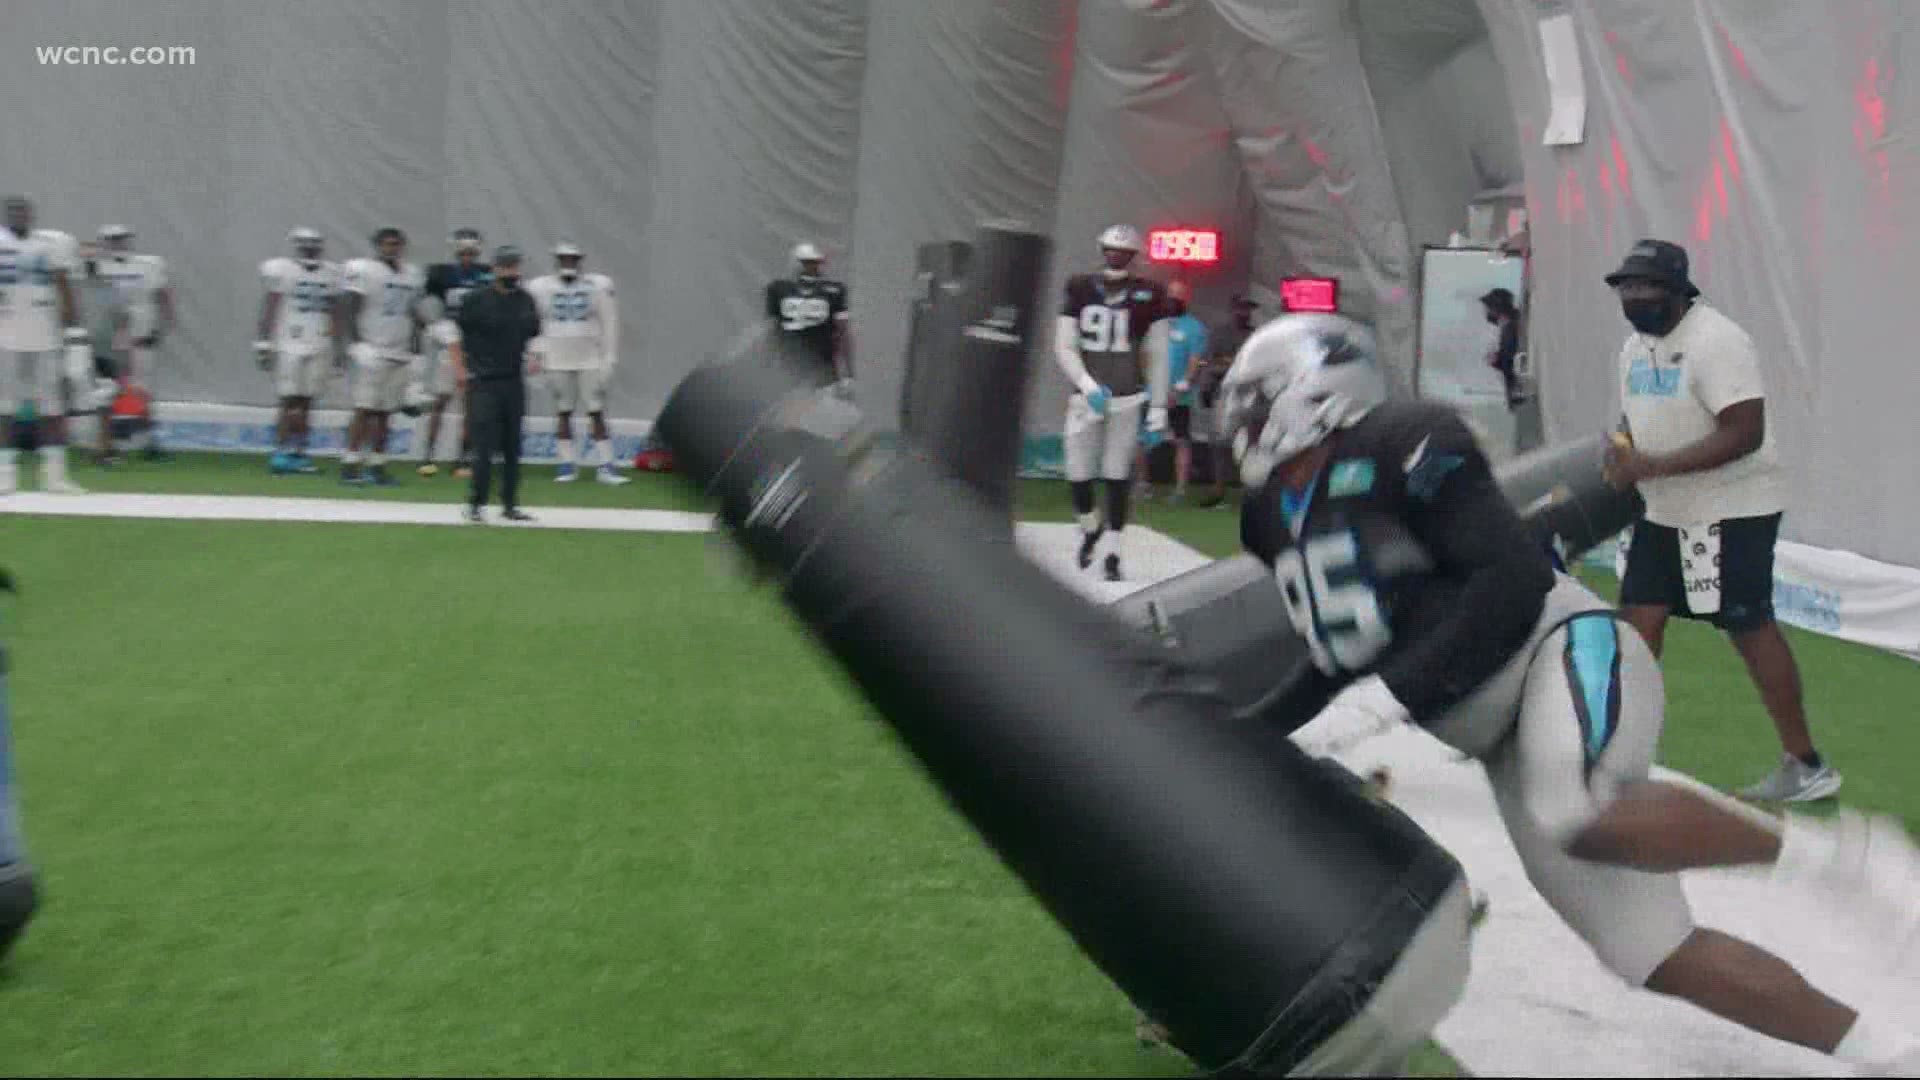 Monday marked the first padded practice of the pre-season for the Carolina Panthers and new QB Teddy Bridgewater.